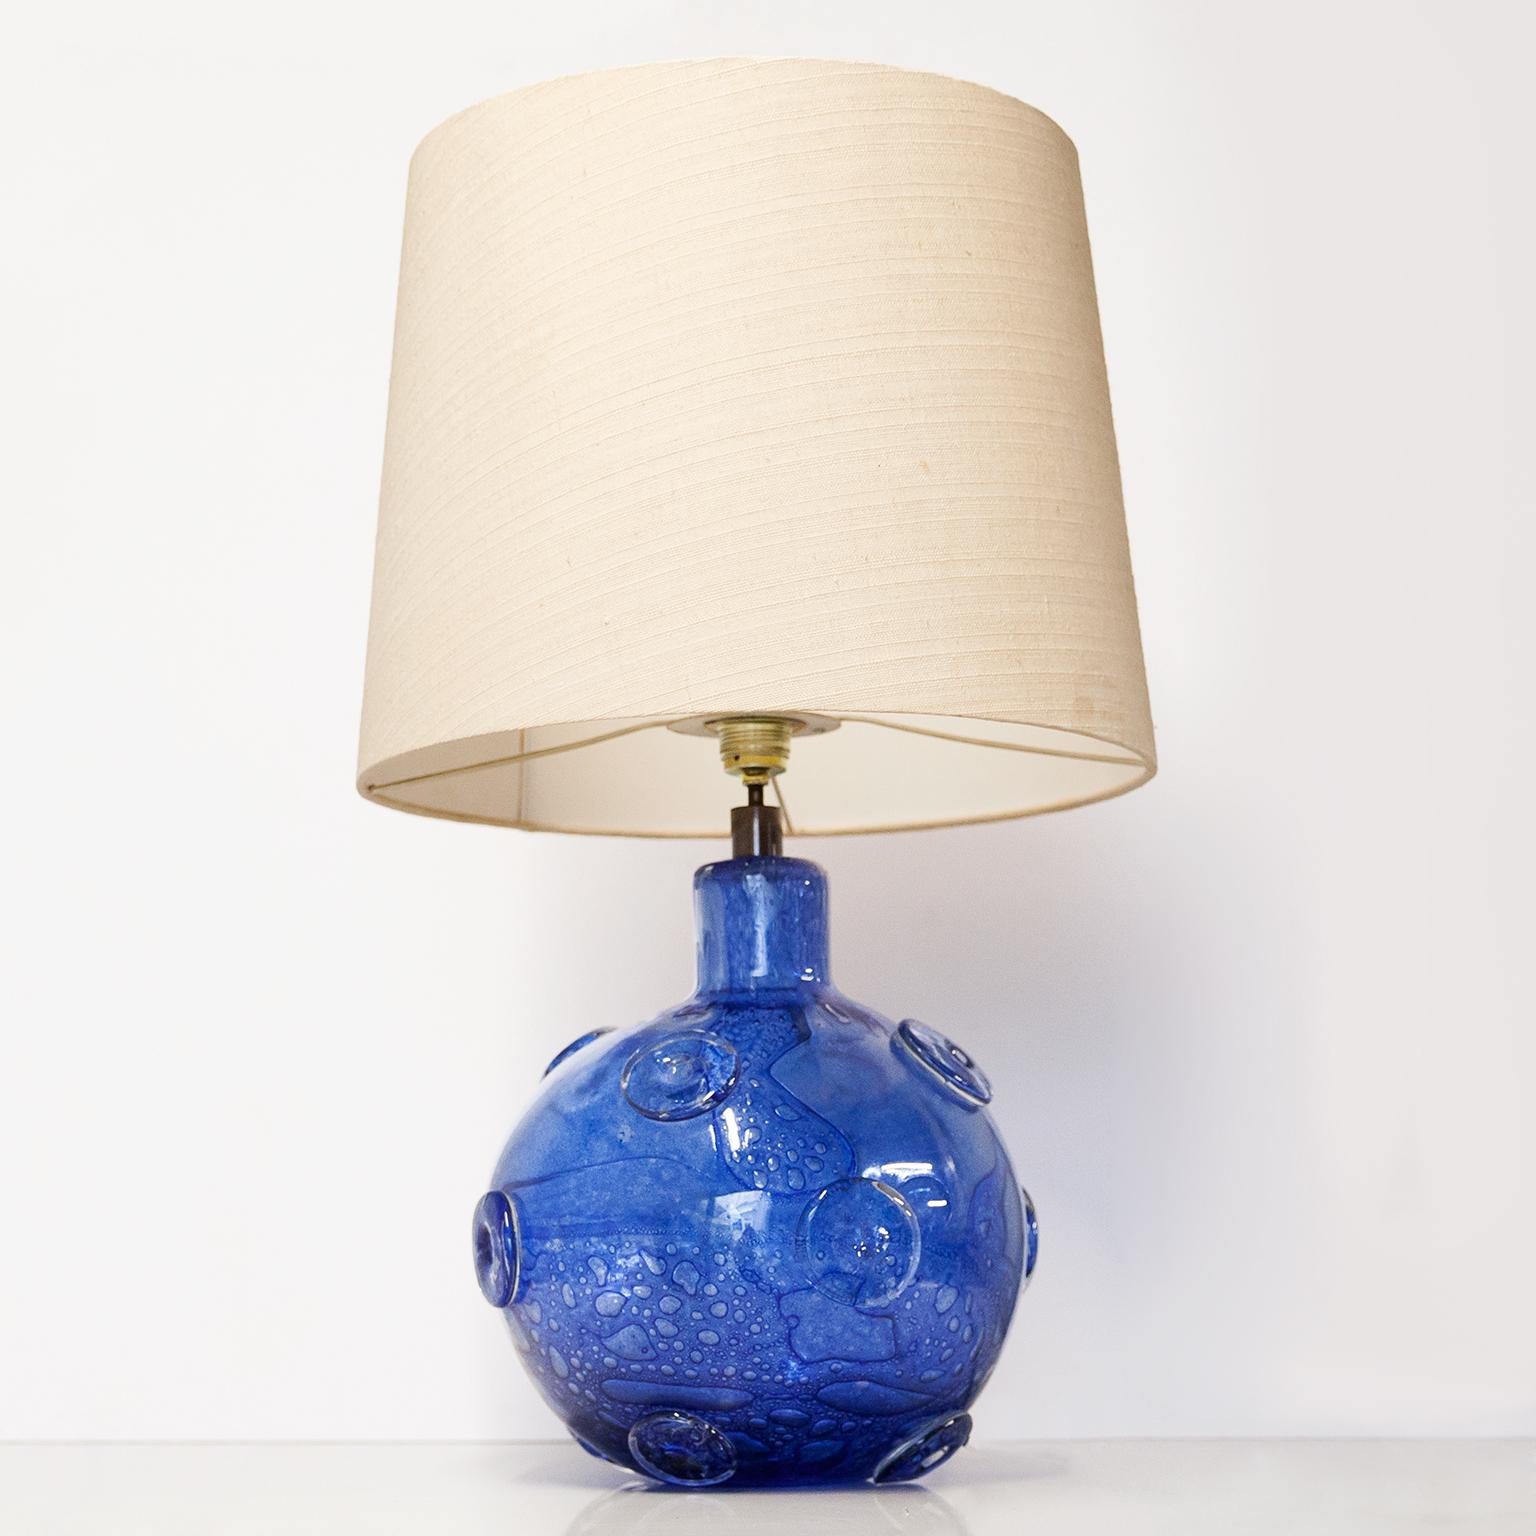 Huge version of Ercole Barovier Efeso table lamp manufactured by Barovier & Toso in the 1940s in Italy. Round glass base with a blue pattern and knob-shaped prunts on the surface. It is similar to the Crespuscolo lamp but the blue version is called